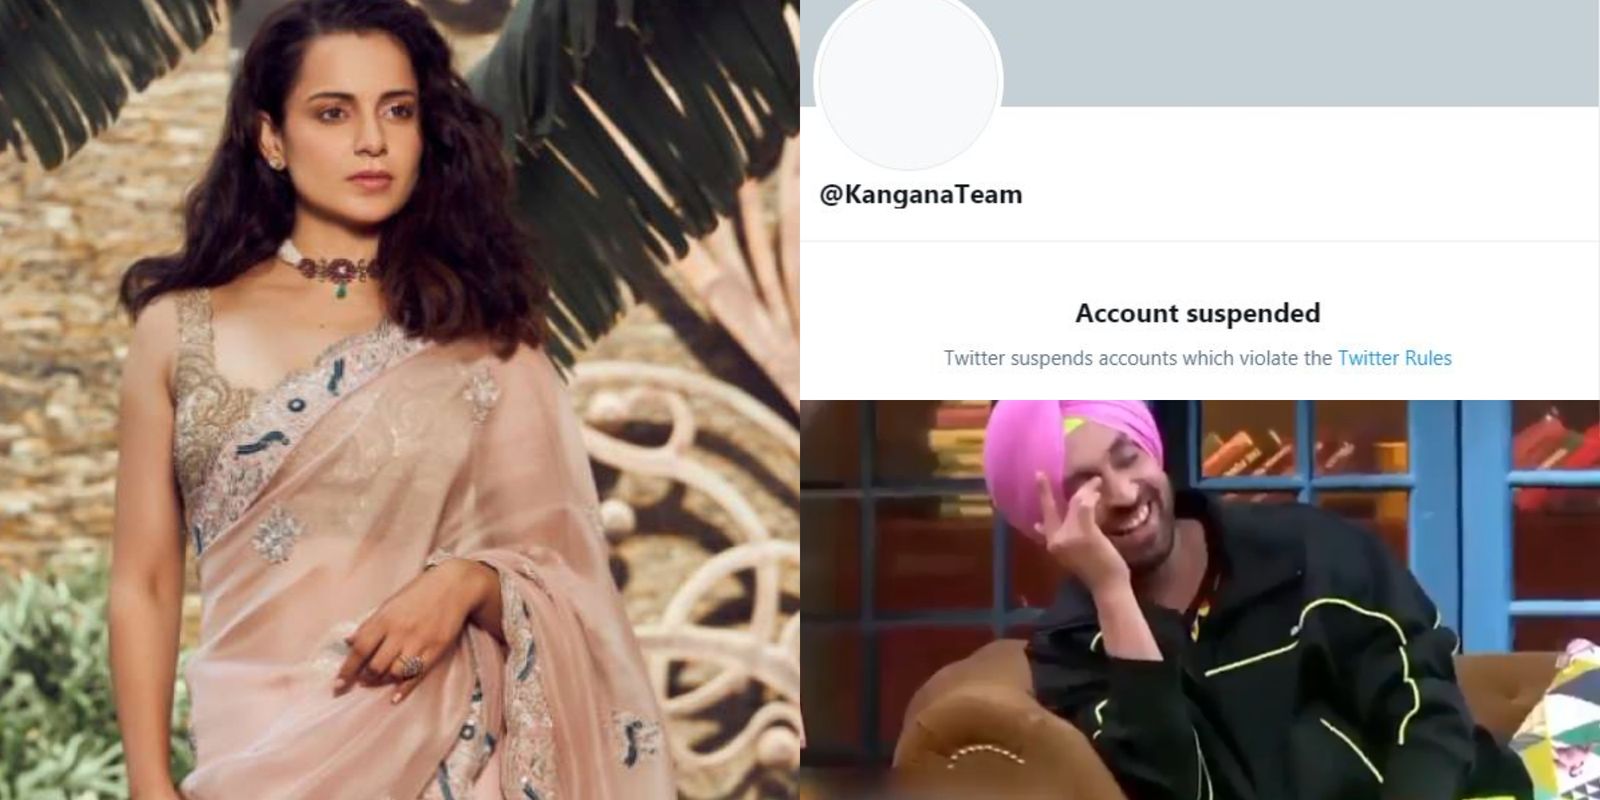 Tweeps Imagine Hrithik Roshan, Diljit Dosanjh's Reactions In Memes As Kangana Ranaut's Account Gets Suspended From Twitter